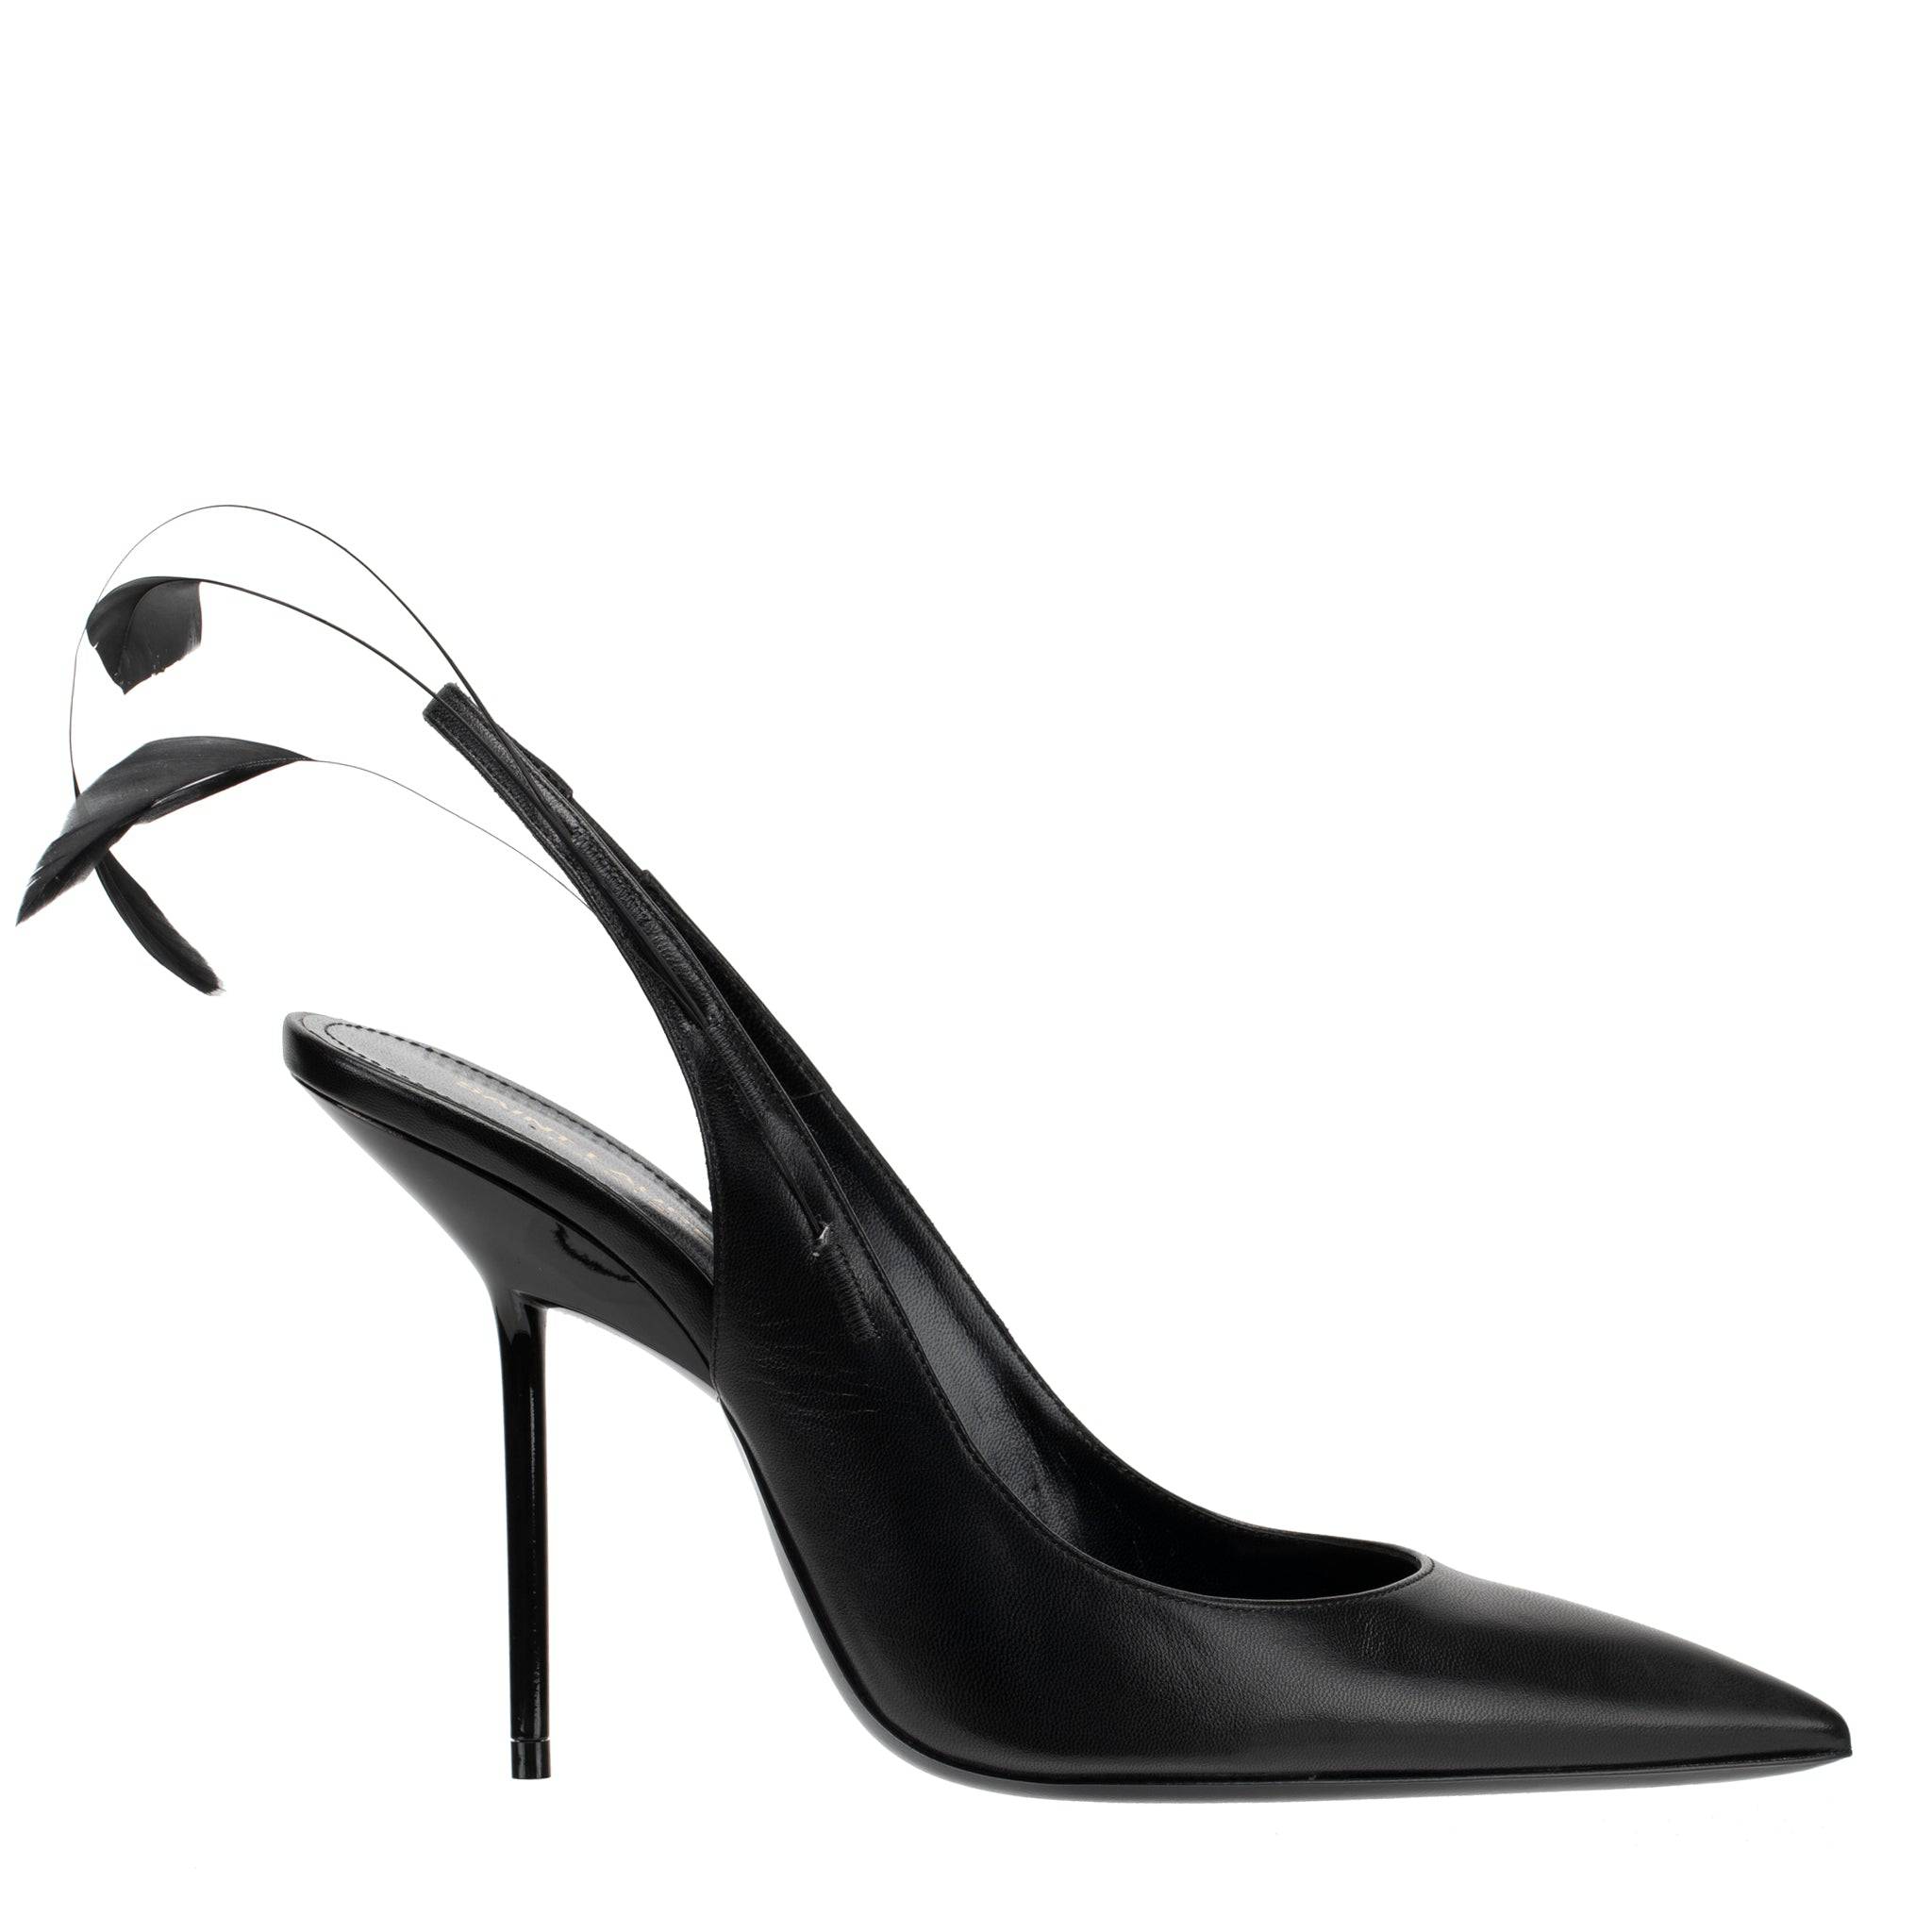 YVES SAINT LAURENT SLINGBACK PUMPS BLACK LEATHER WITH FEATHER DETAIL - On Repeat